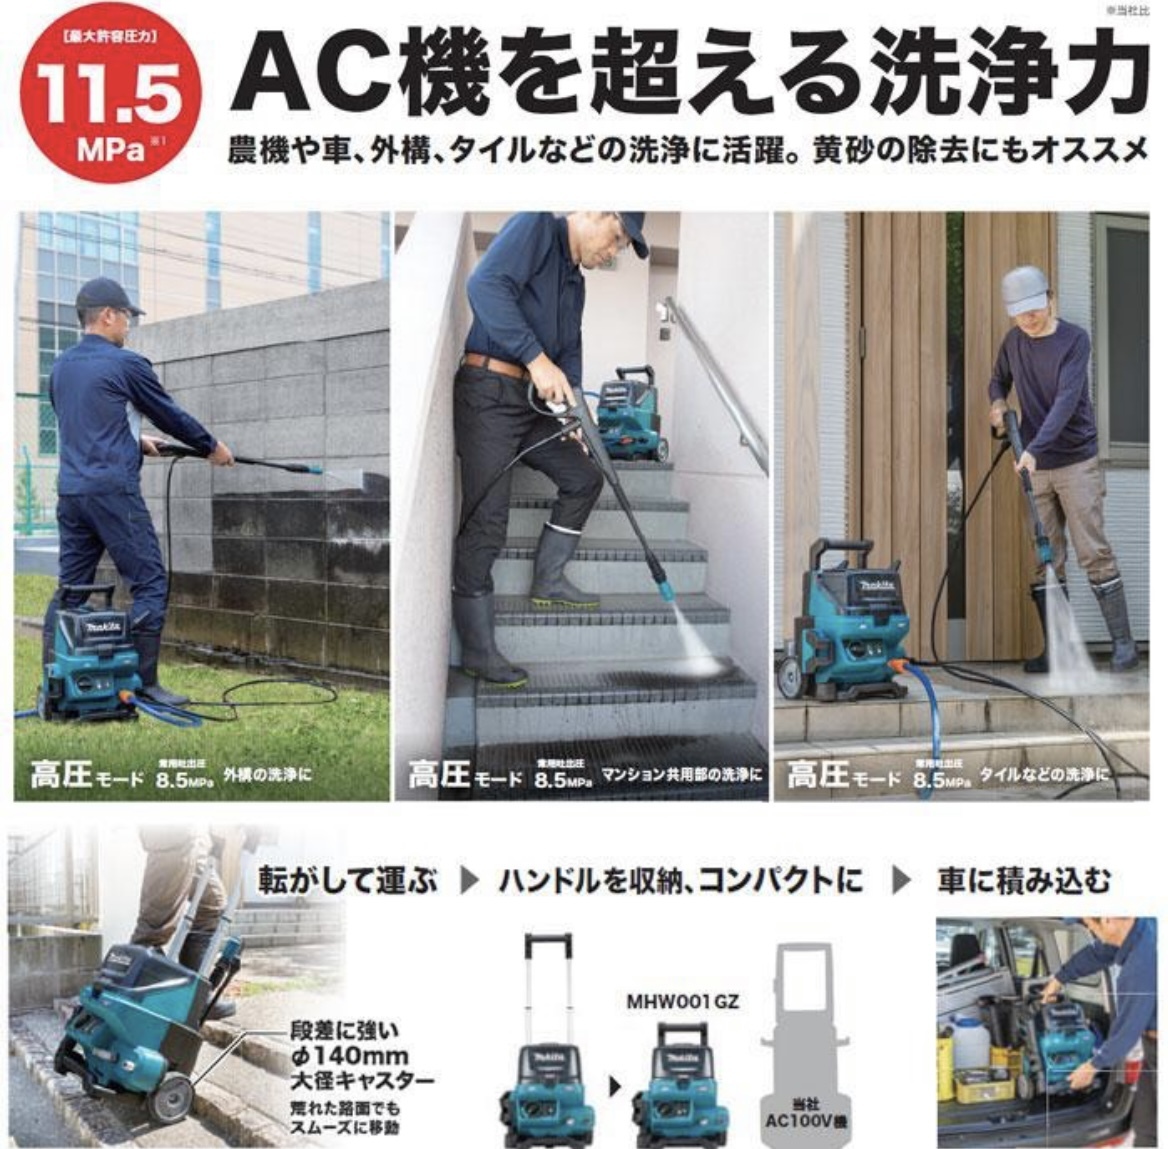 [ new goods unused goods ]makita Makita 40Vmax rechargeable high pressure washer MHW001GZ power tool body only 1973